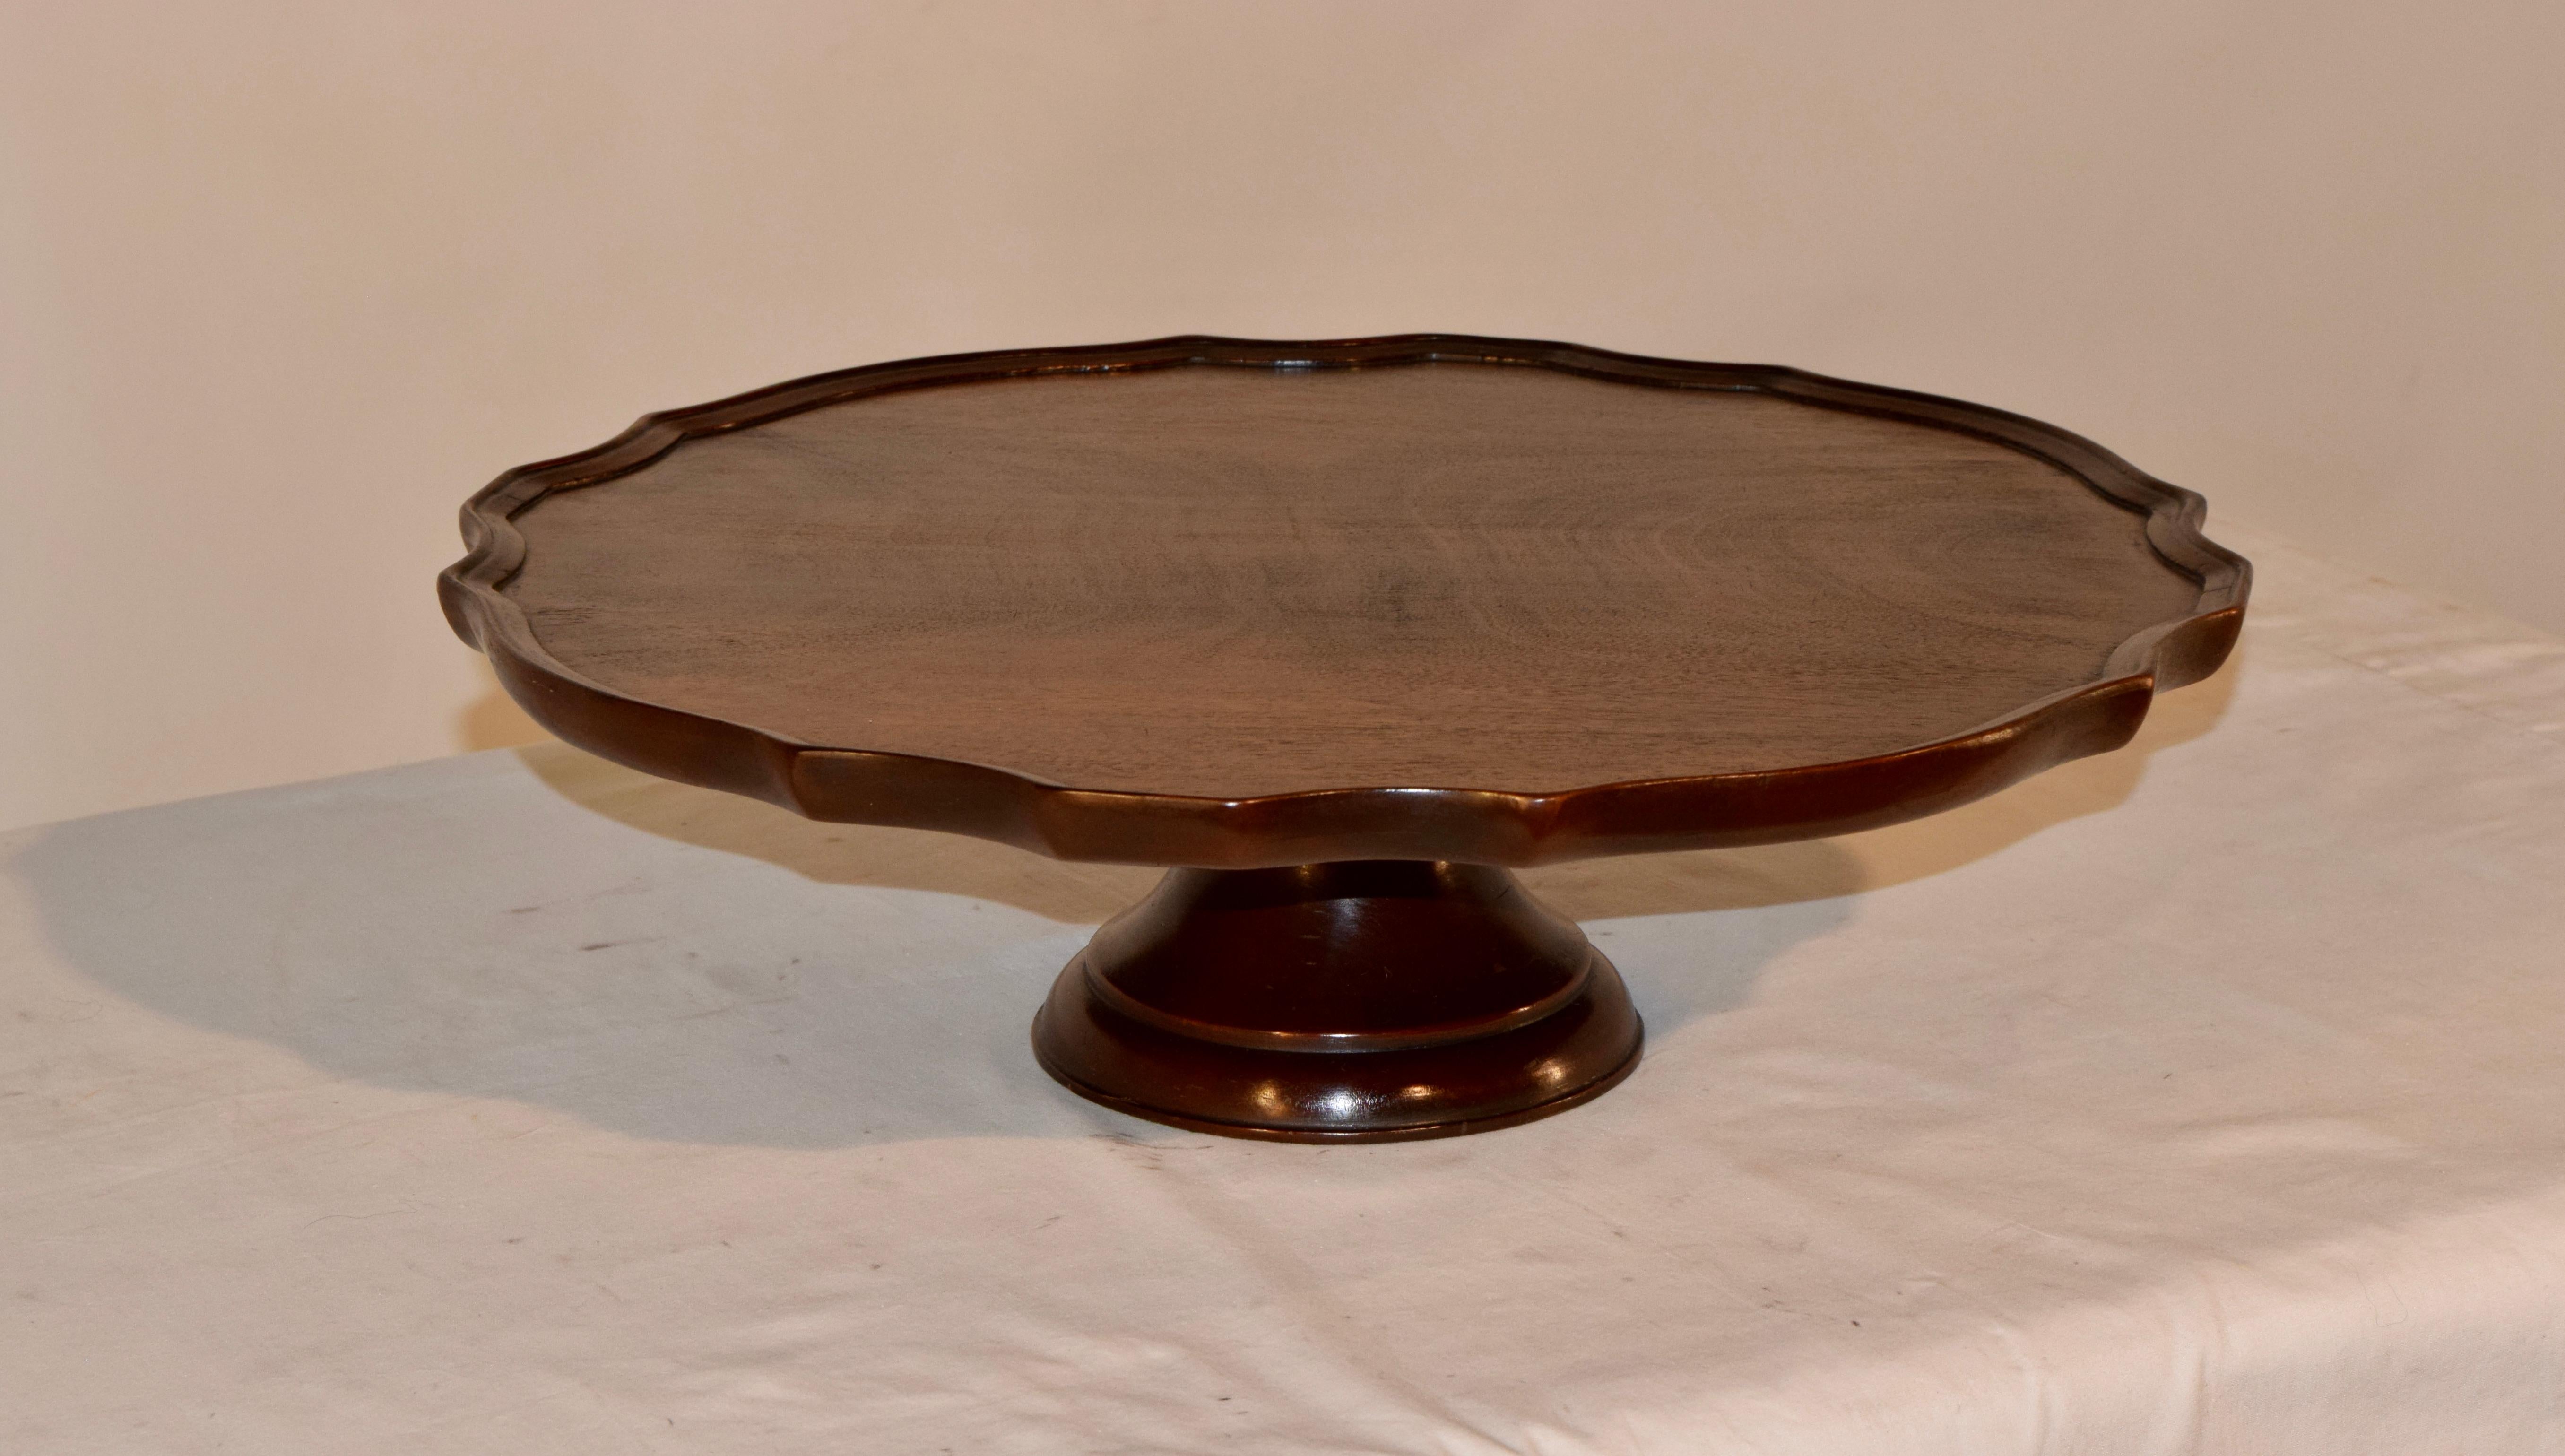 19th century mahogany lazy Susan from England with a molded and scalloped edge around the top, which has wonderful figuring in the wood. It is supported on a hand turned mahogany base.